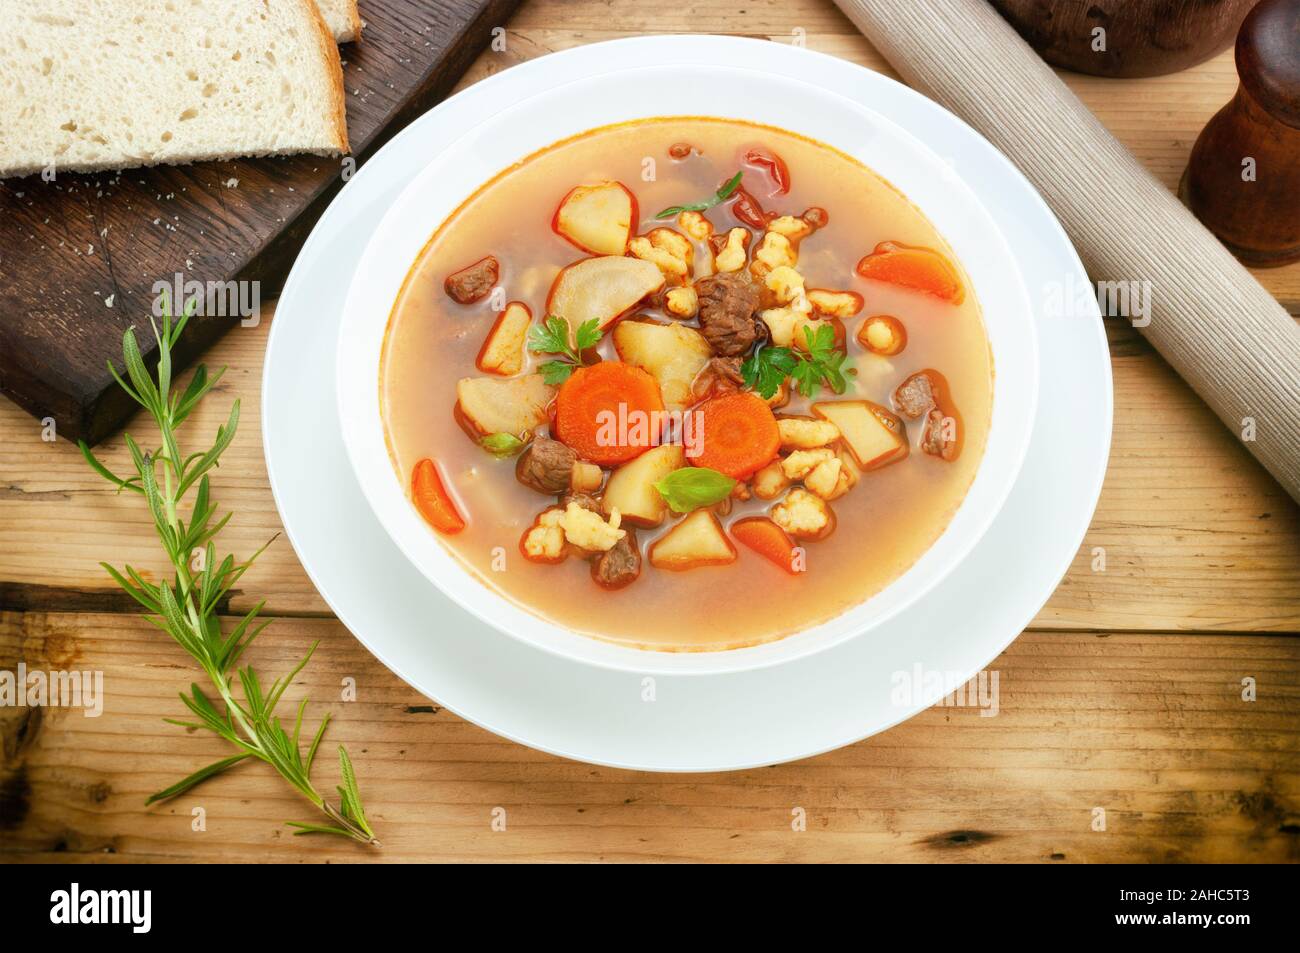 Goulash soup on wooden table Stock Photo